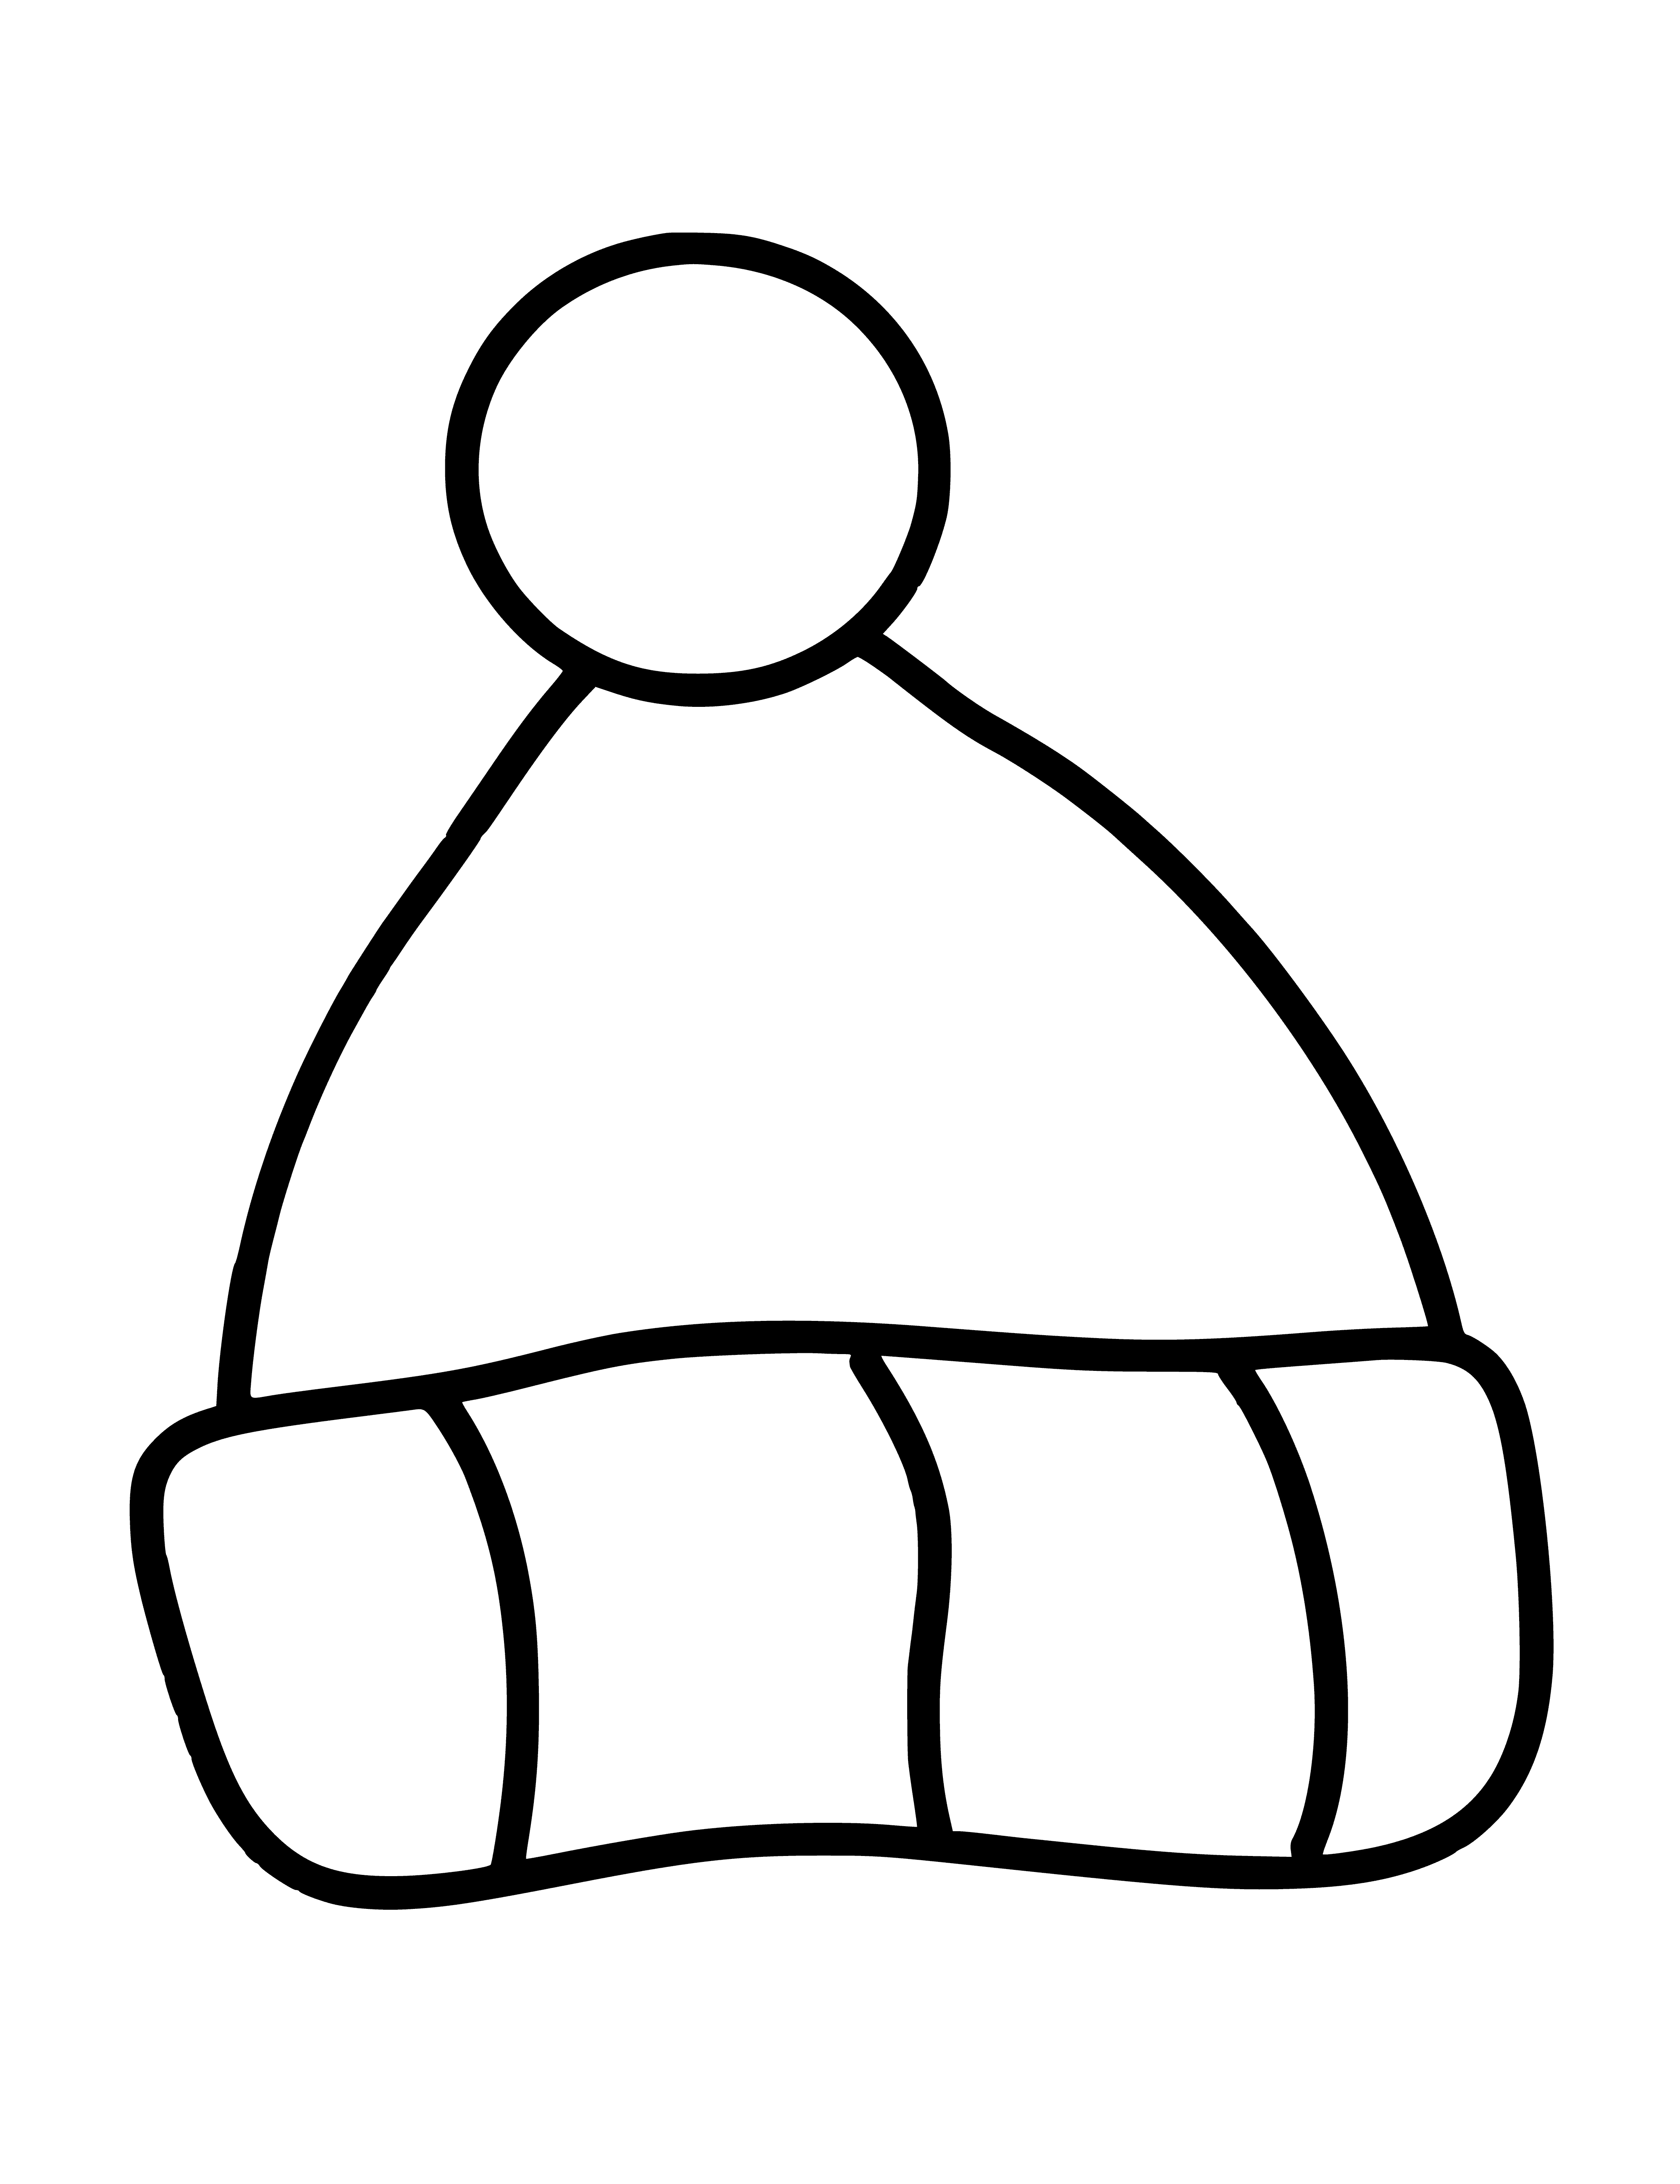 Hat coloring page